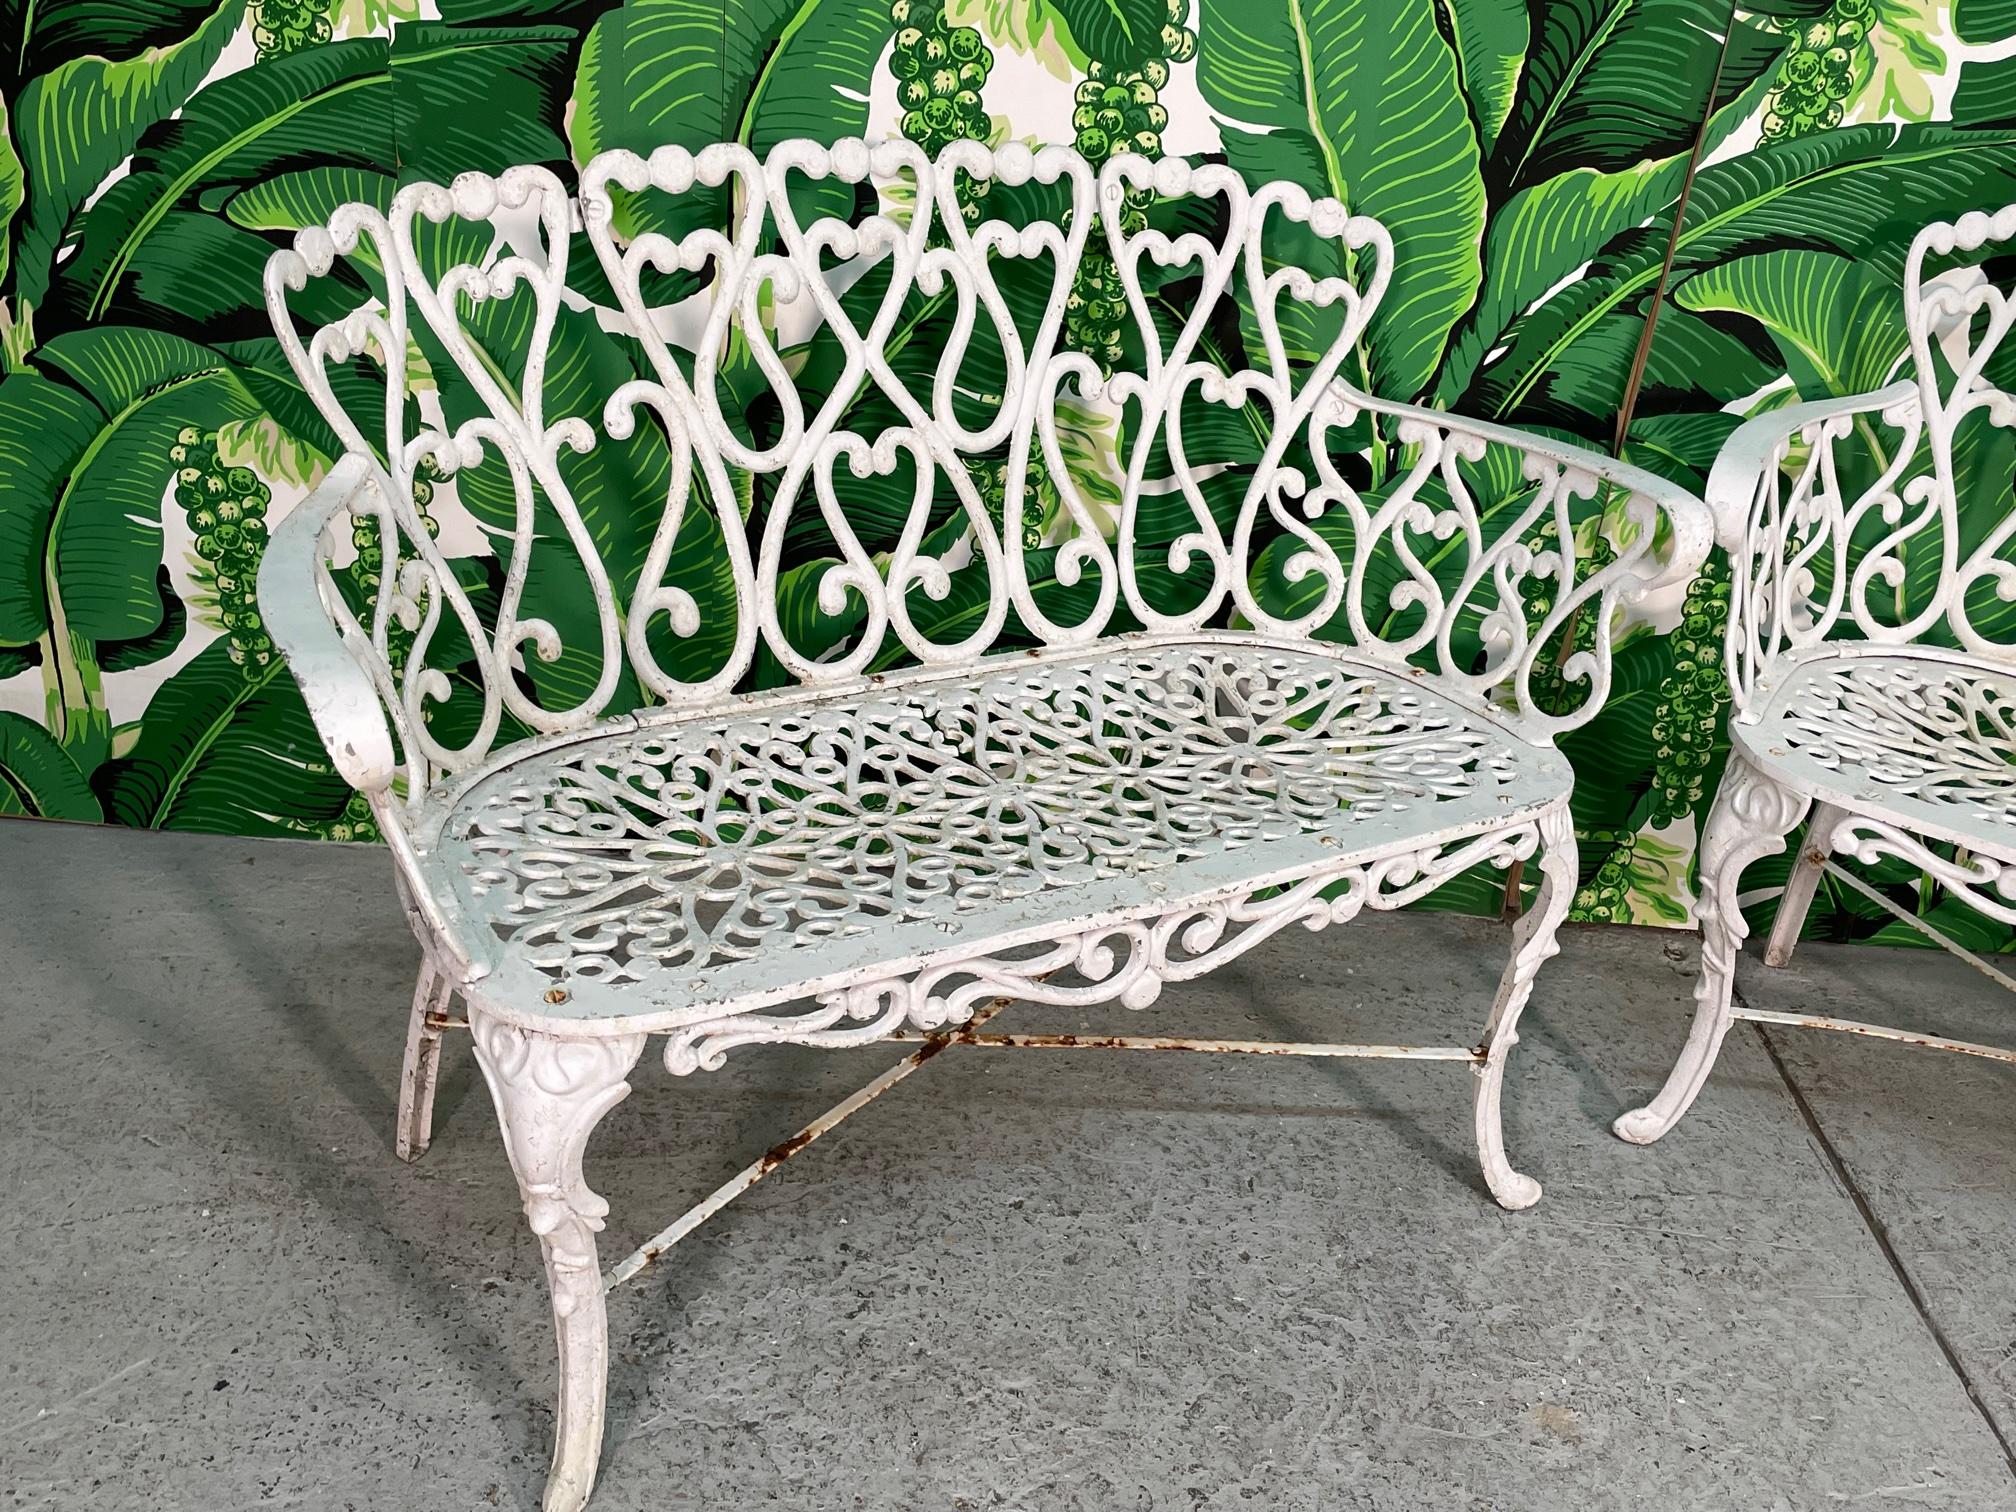 Pair of cast aluminum garden/patio benches in the manner of Frances Elkins. Loveseats or small sofas. Heavy construction, assuming aluminum but possibly iron. Structurally sound with imperfections to the finish (see photos). Seat height measures